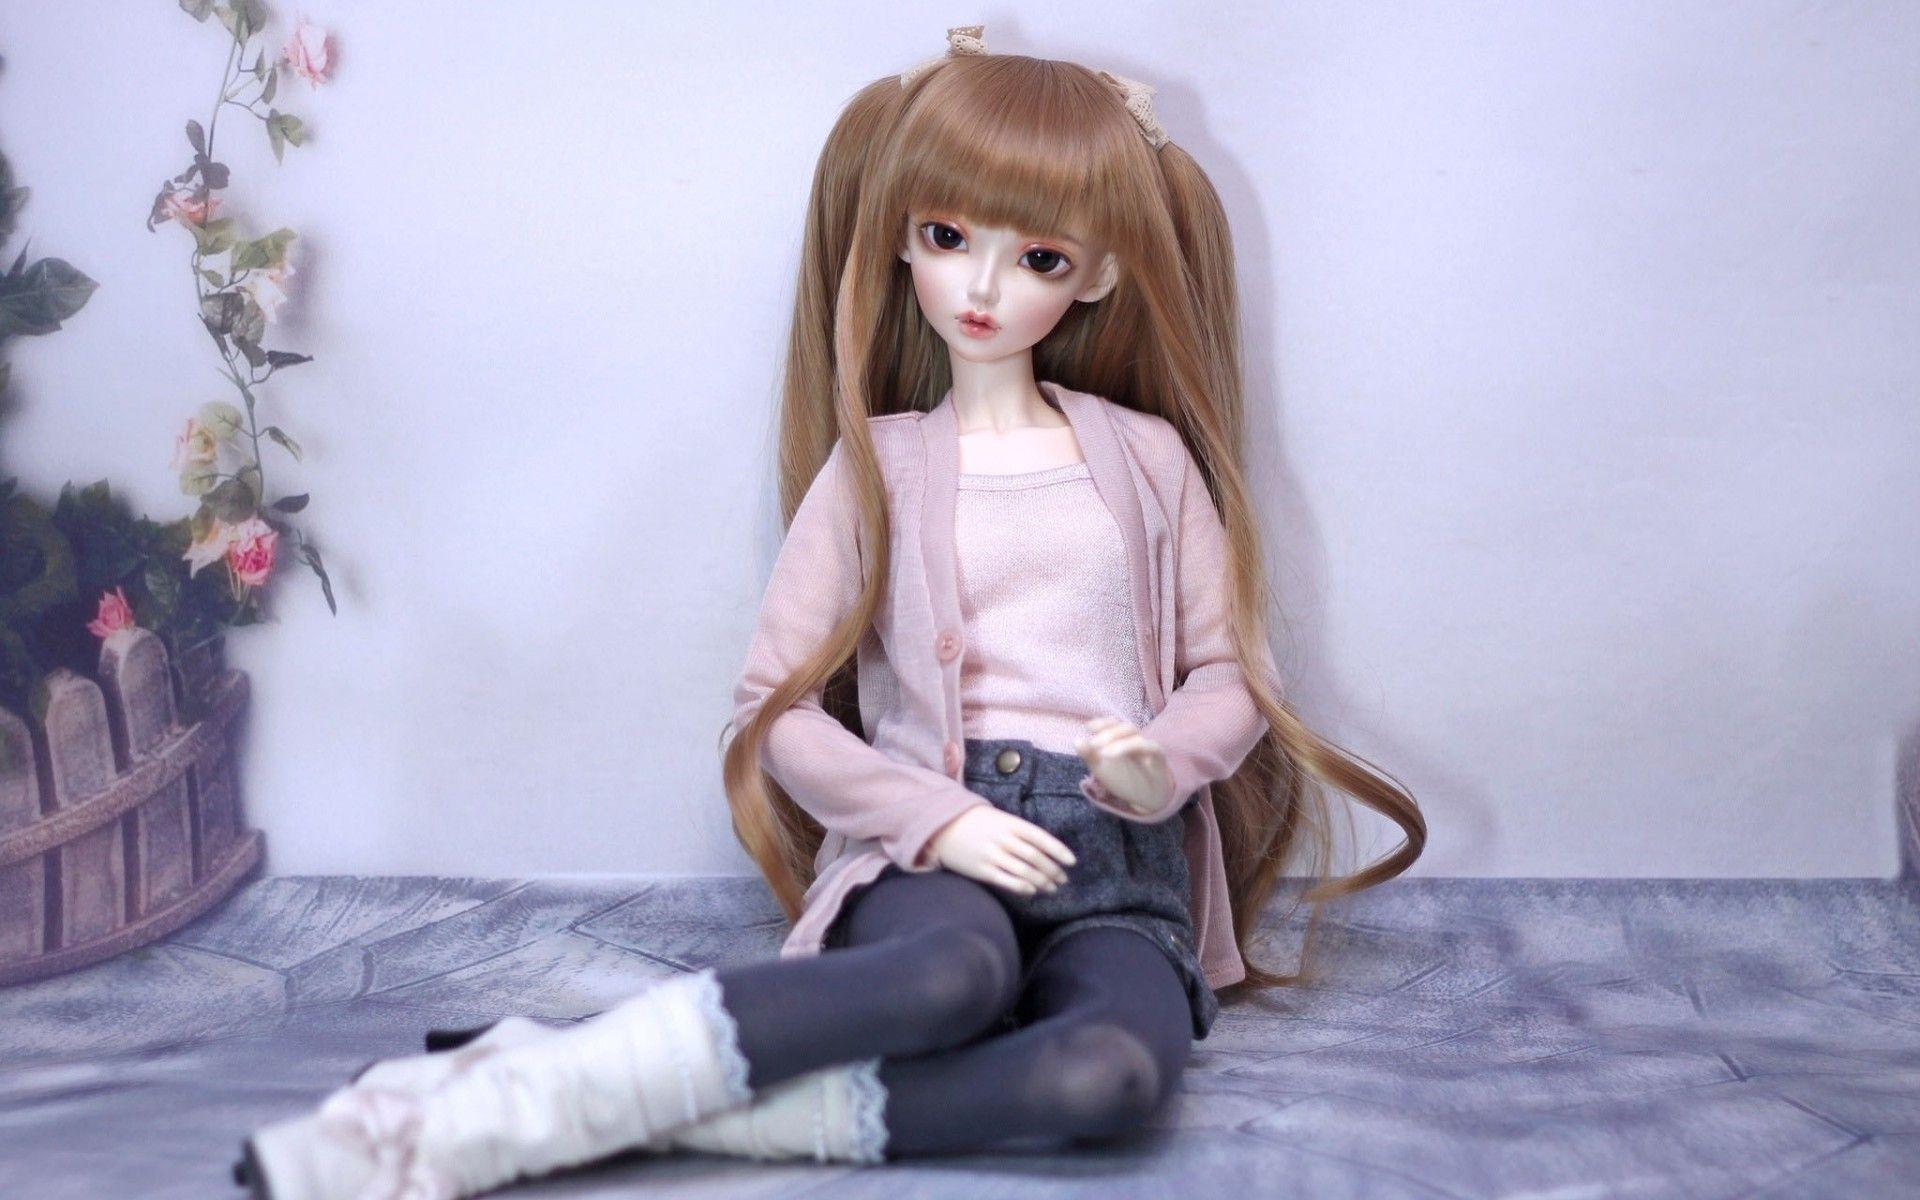 Barbie Doll Waitting For SomeOne HD Wallpaper PIC MCH043565